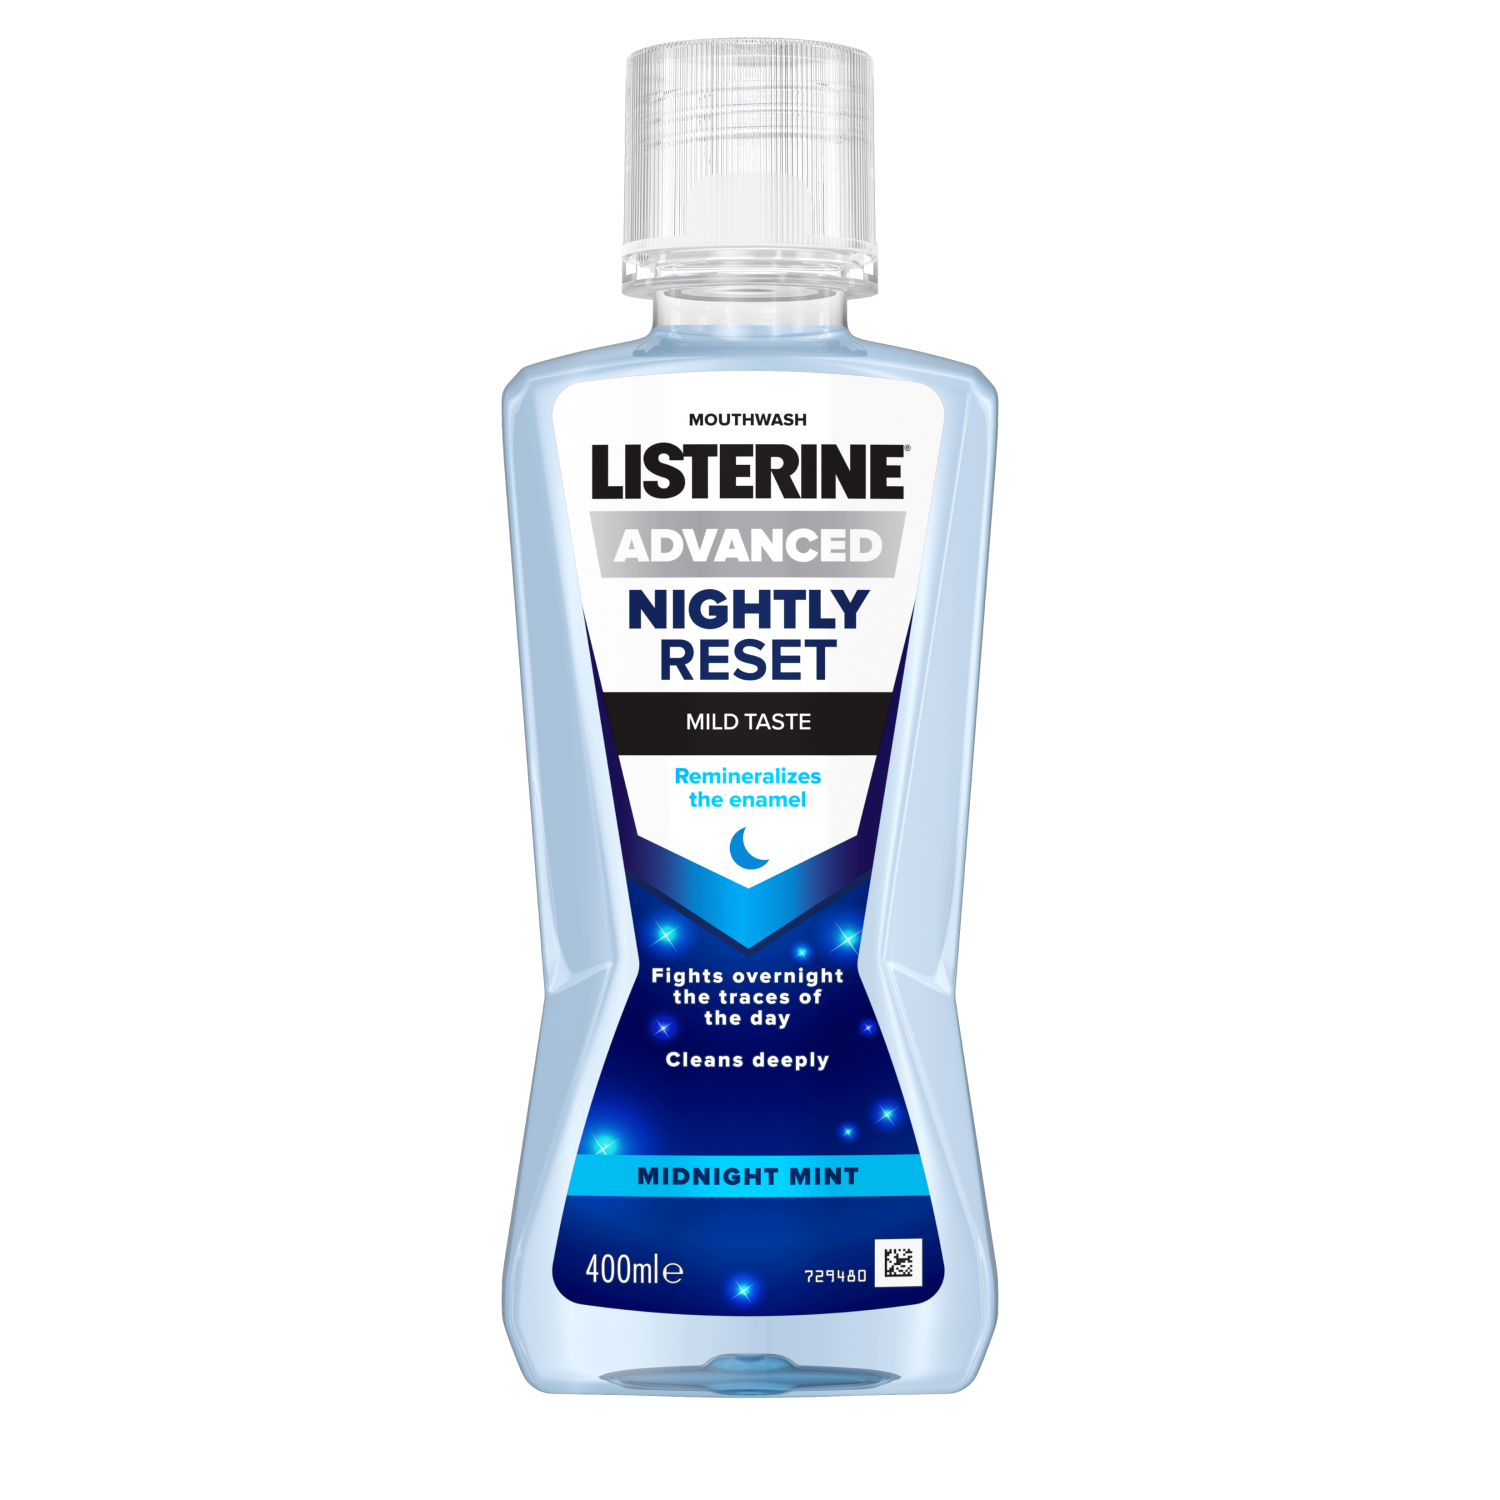 Listerine Advanced Nightly Reset Mild Taste Midnight Mint 400 ml, remineralizes the enamel, fights overnight the traces of the day, cleans deeply feliratokkal